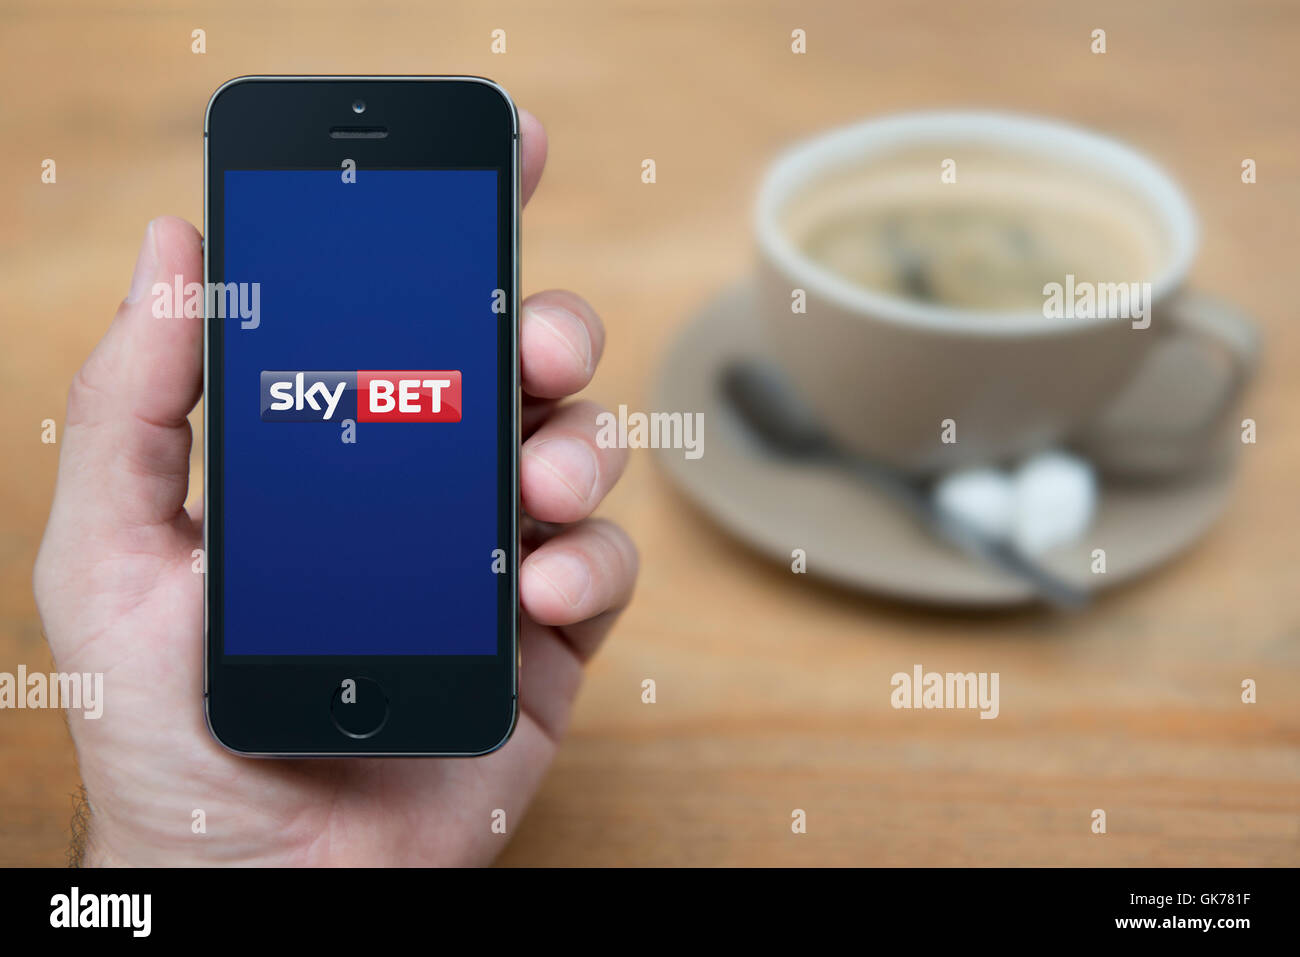 A man looks at his iPhone which displays the Sky Bet logo, while sat with a cup of coffee (Editorial use only). Stock Photo